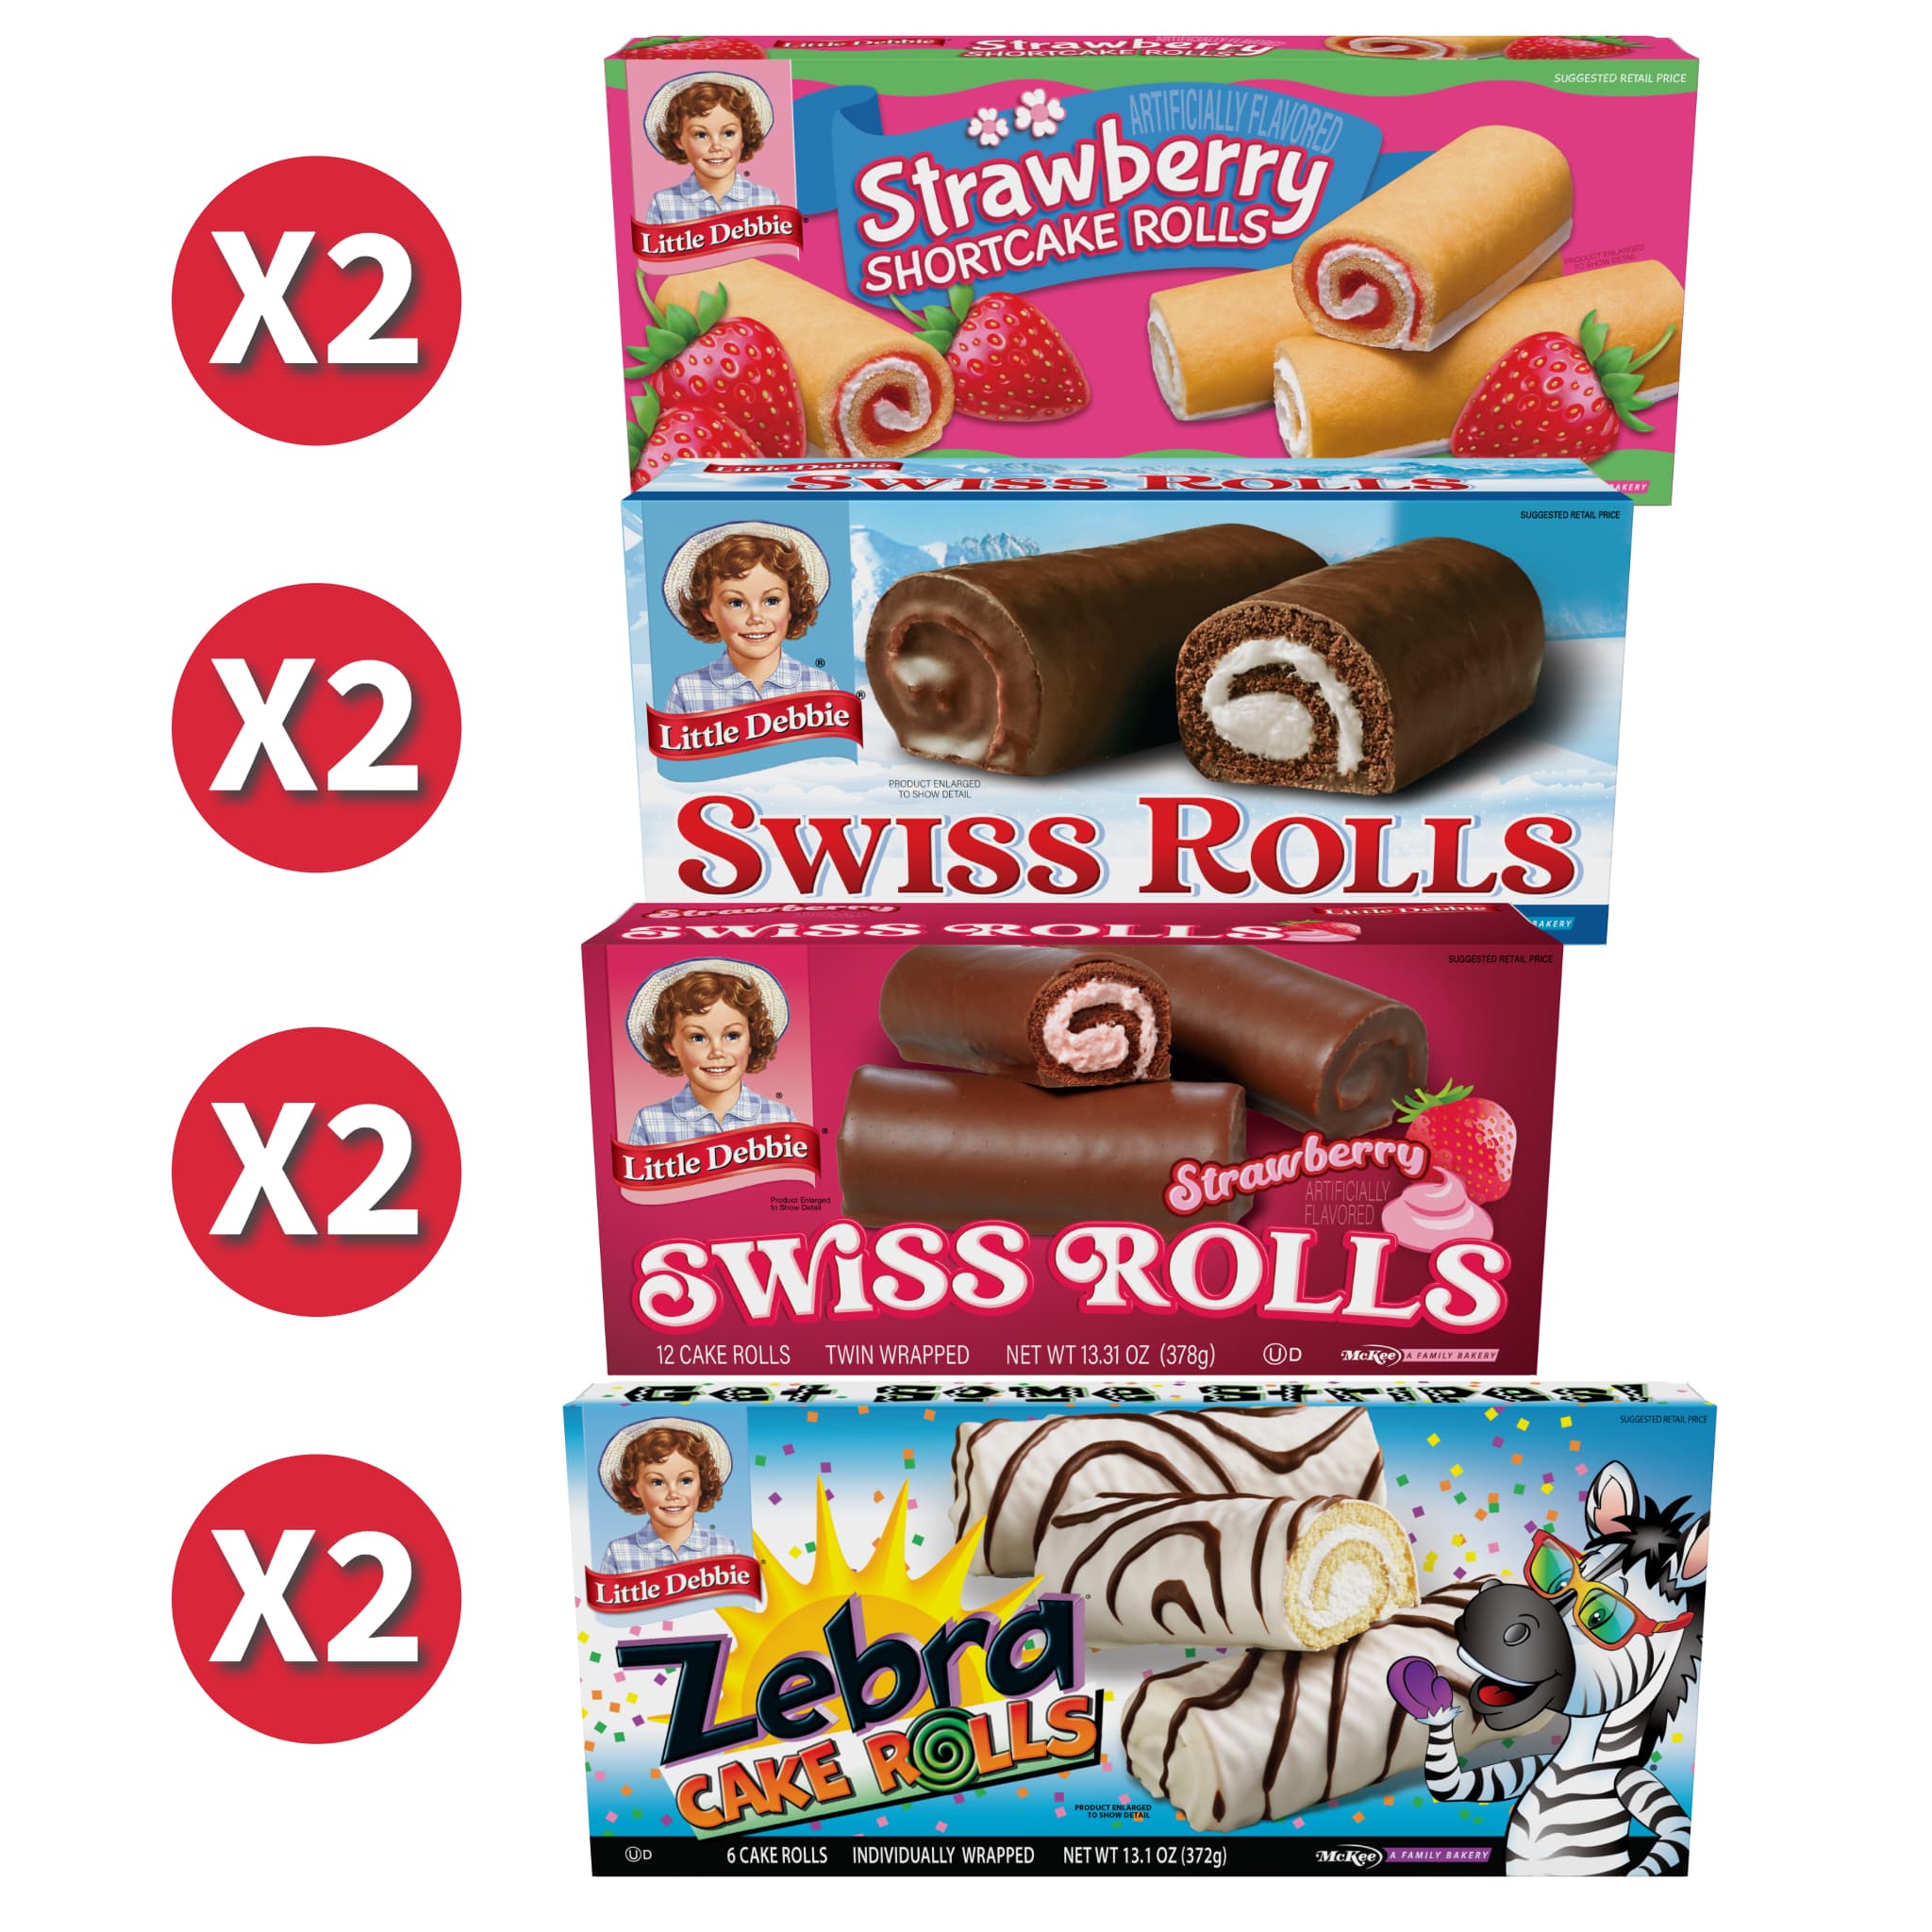 A collection of Little Debbie rolled treats displayed with a red circle and "X2" indicating the quantity for each item. The collection includes two cartons of Strawberry Shortcake Rolls, two cartons of Swiss Rolls, two cartons of Strawberry Swiss Rolls, and two cartons of Zebra Cake Rolls. Each carton features colorful packaging with images of the respective treats.